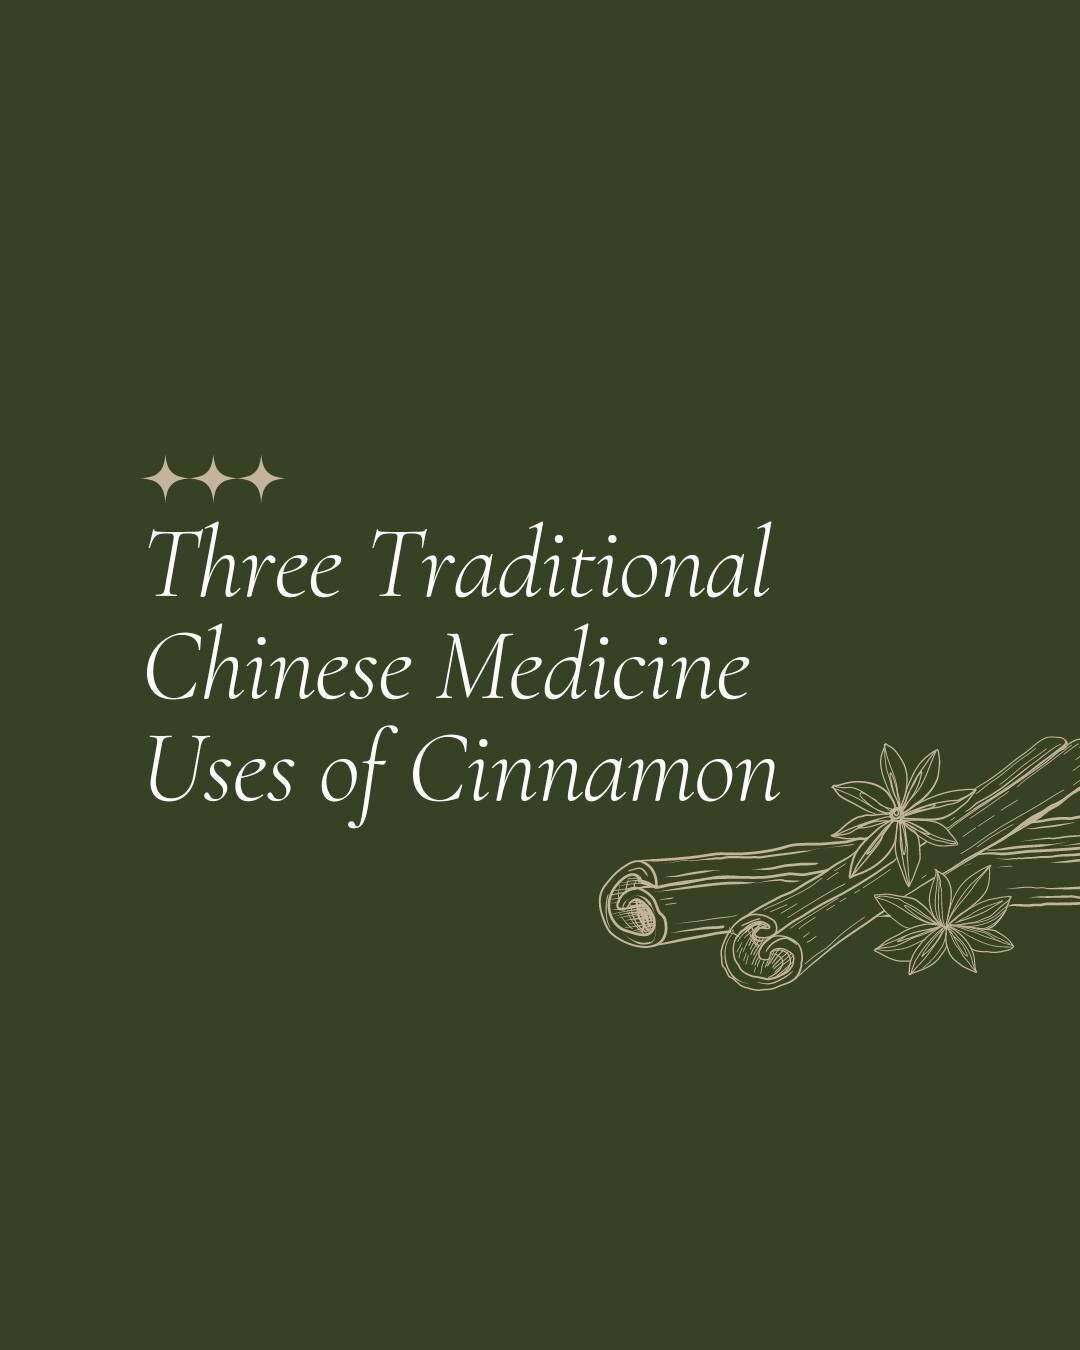 Cinnamon, known as gui zhi, is slightly sweet, pungent and has a warming effect. 

Not only is this spice great for holiday recipes during these cooler months, but cinnamon also has many applications for health and healing.

Here are 3 Traditional Ch